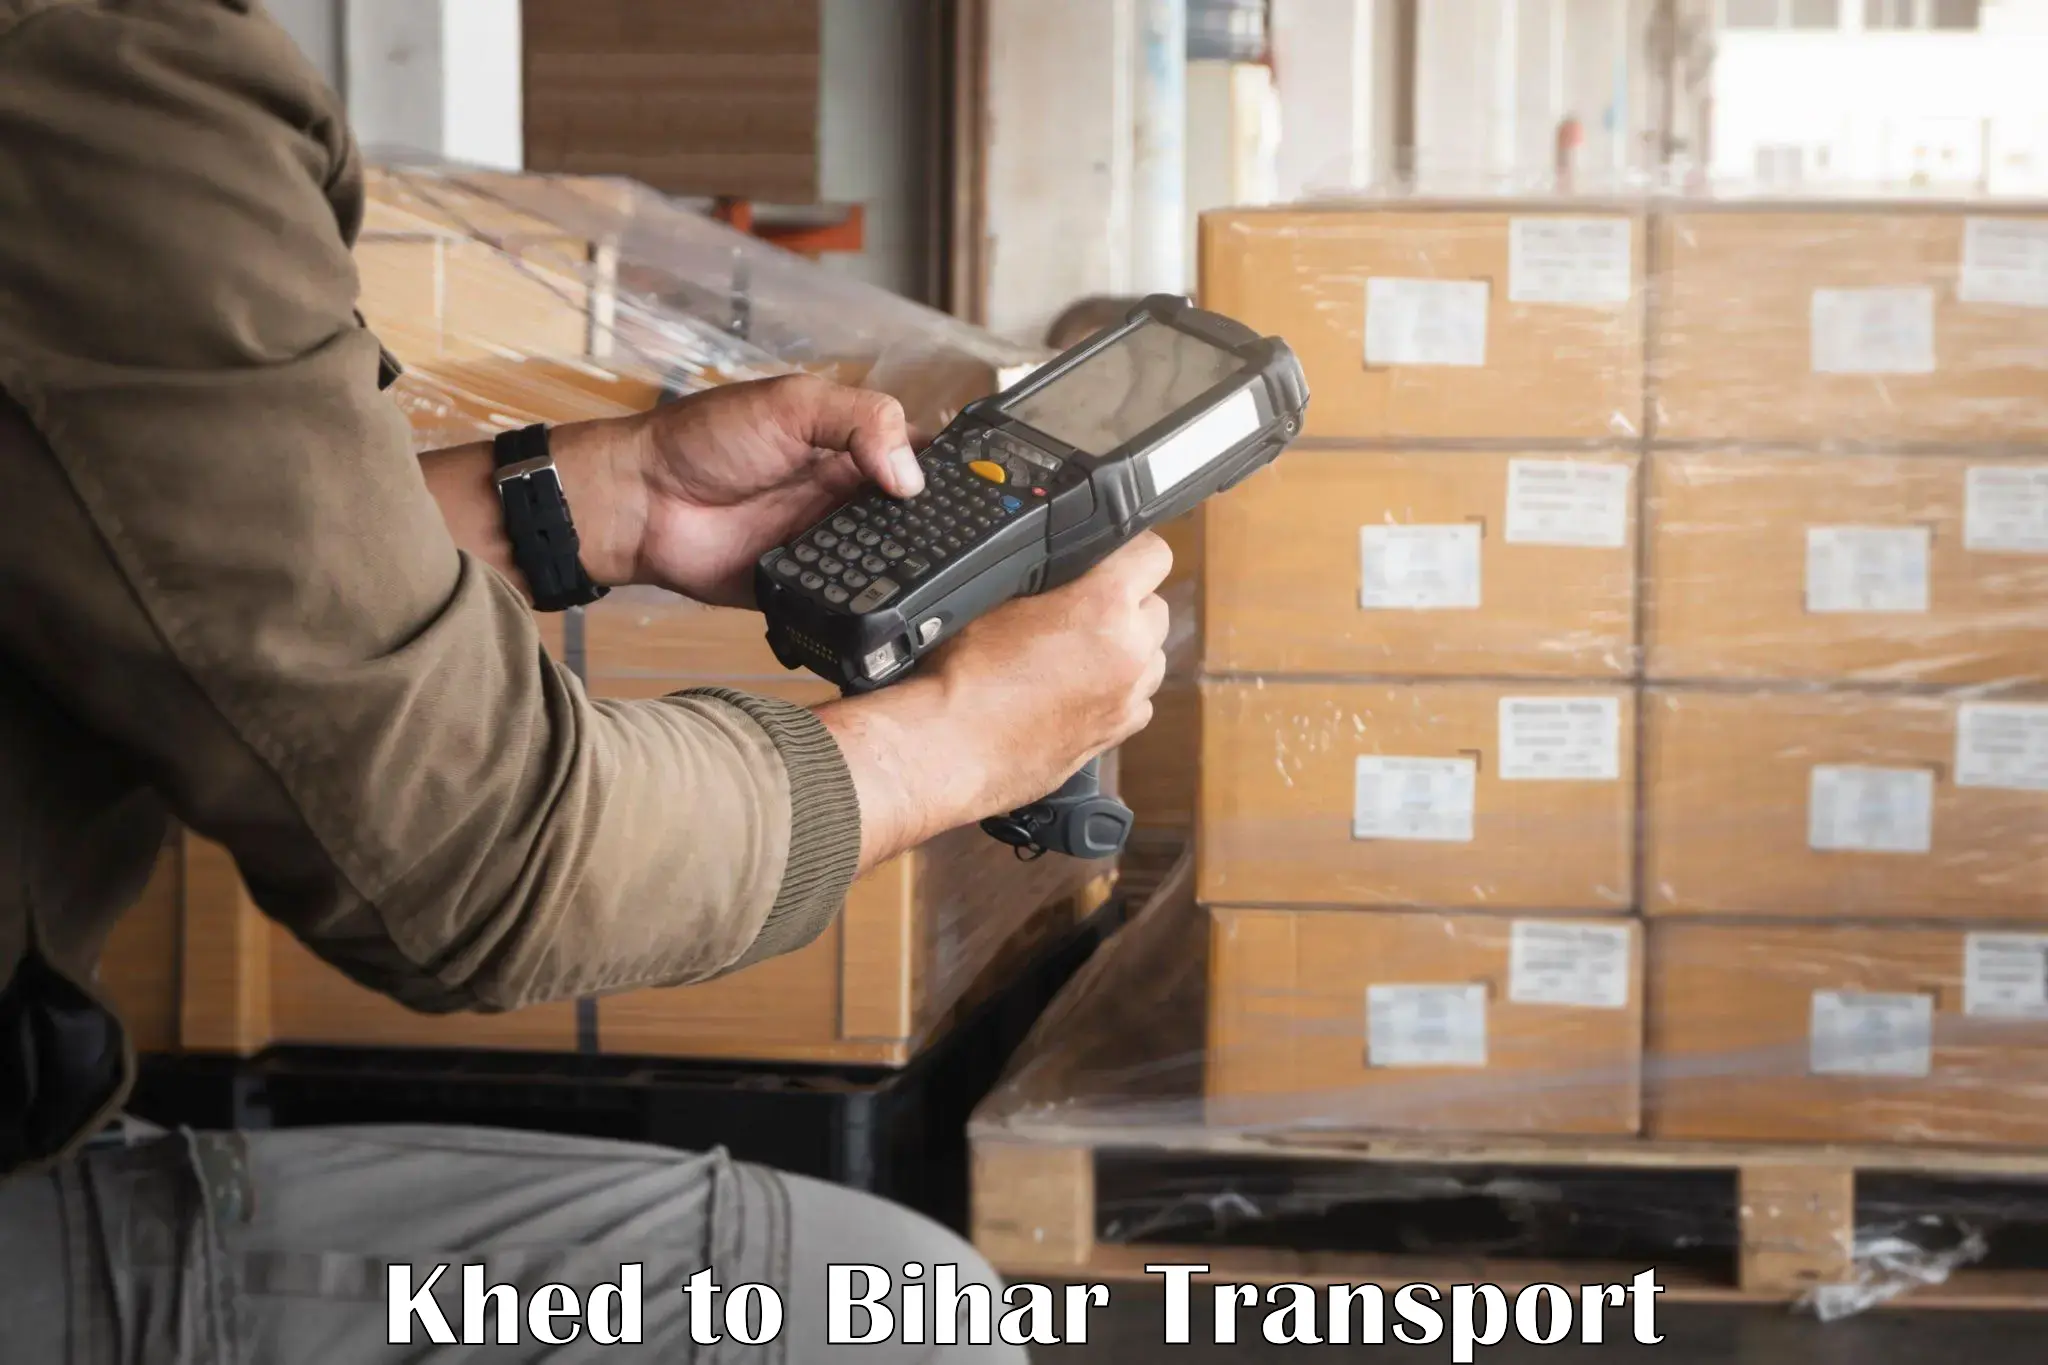 Container transport service Khed to Bihta